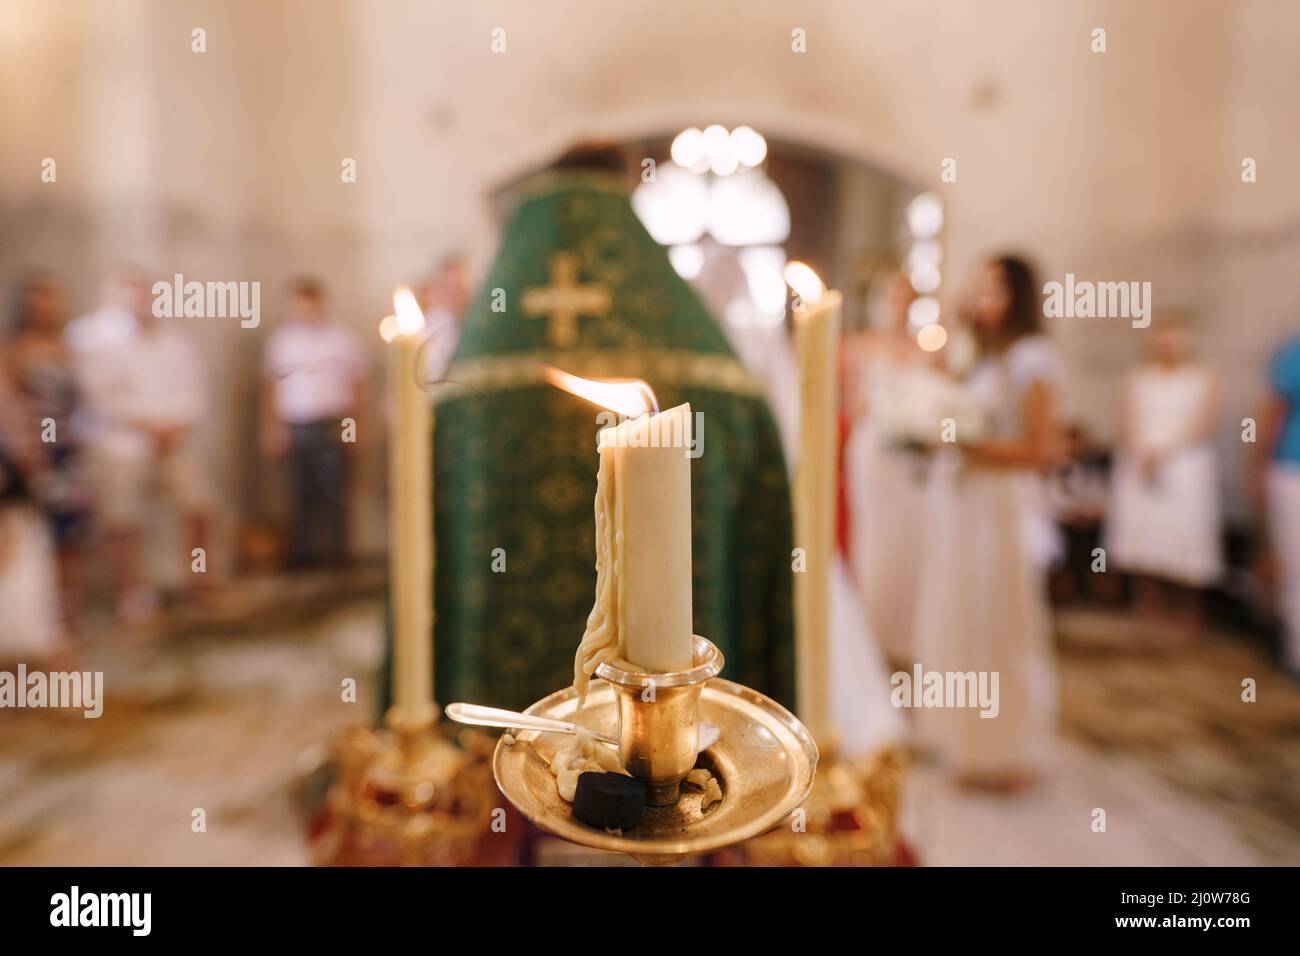 Candles burn on tall candlesticks during a wedding ceremony in a church Stock Photo